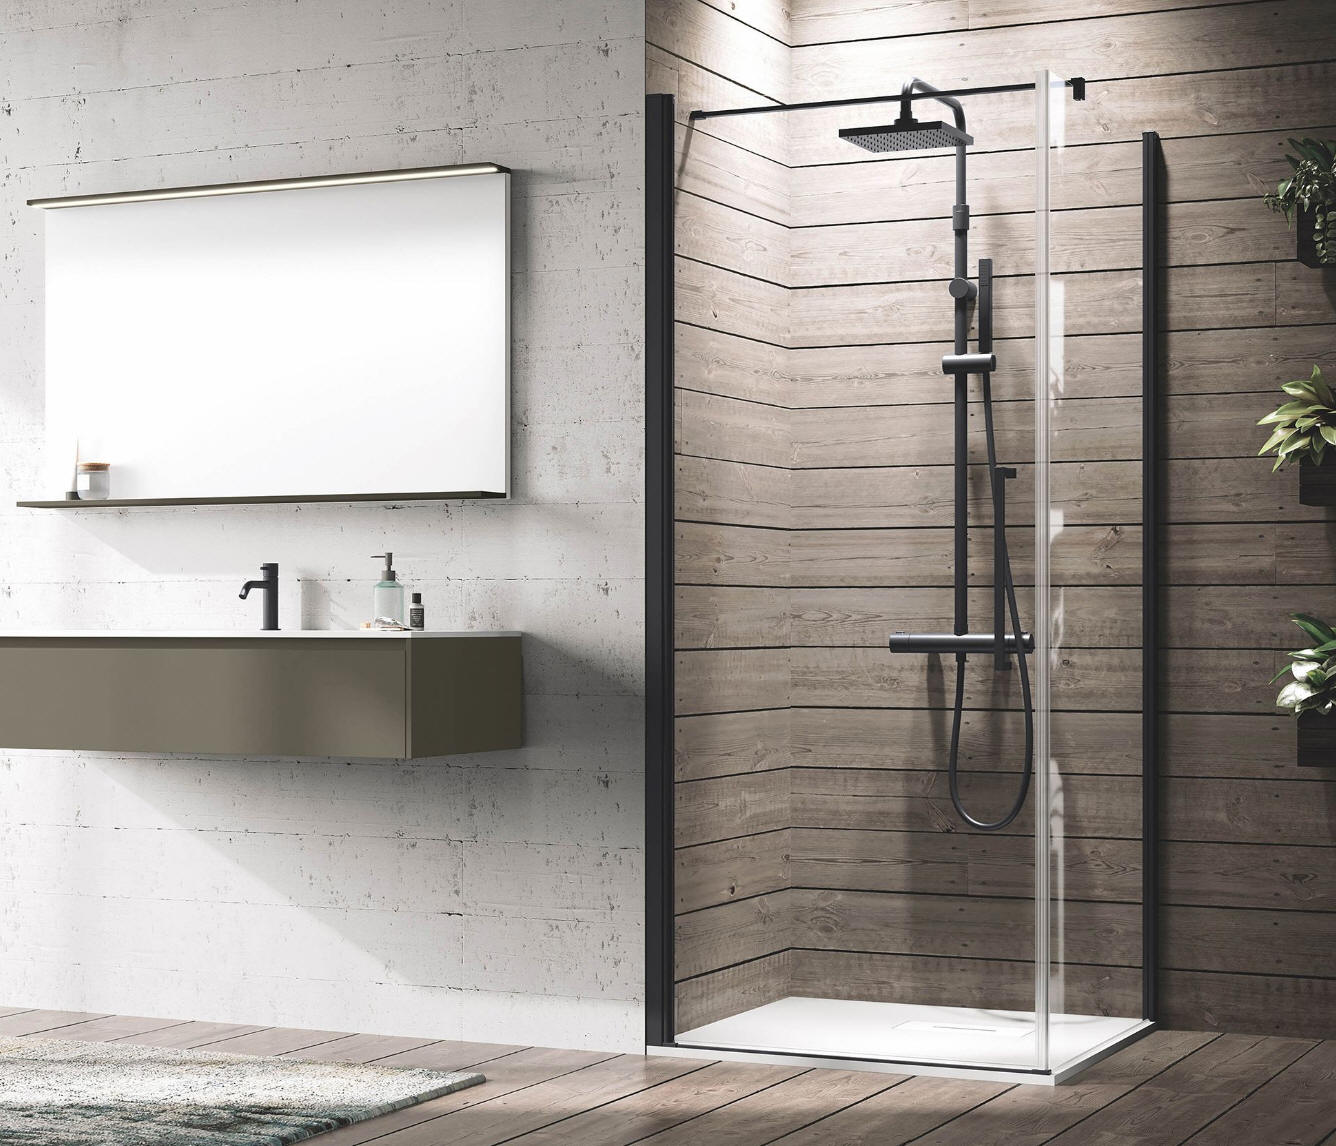 Novellini YOUNG G hinged shower door. Shown here with Matt Black profiles, clear glass and optional fixed side panel to create a corner shower enclosure